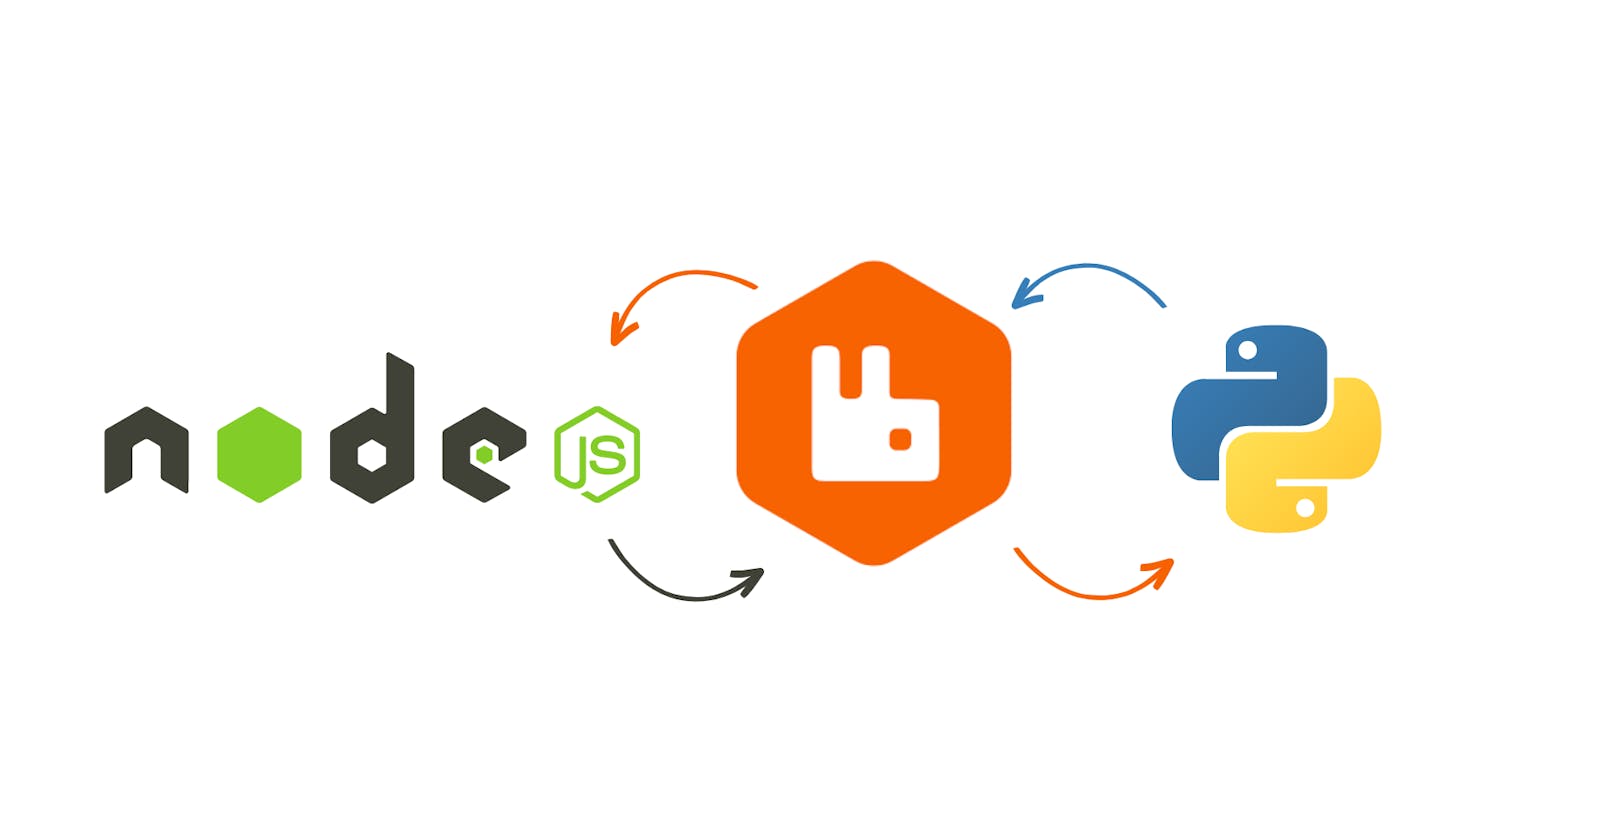 Create a simple Microservices  backend using nodeJS, Python, and rabbitMQ